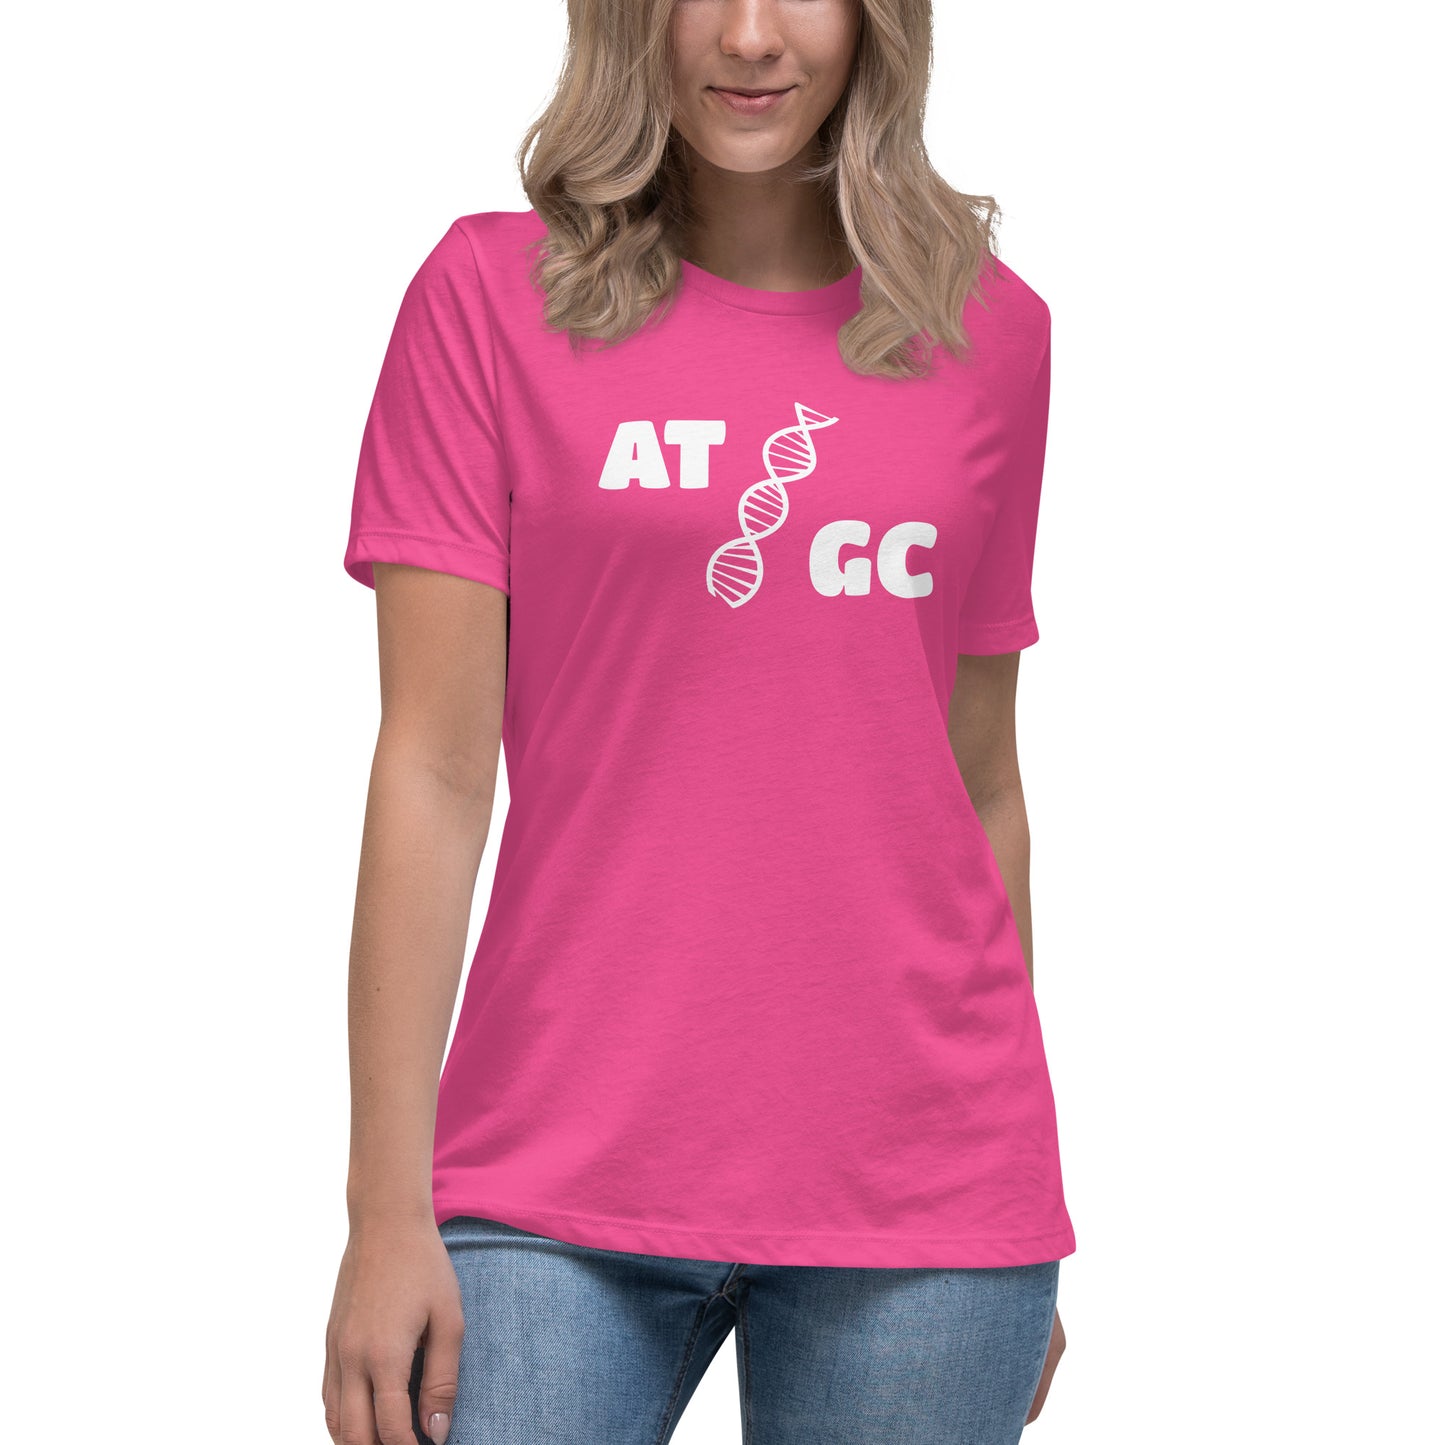 Women with berry t-shirt with image of a DNA string and the text "ATGC"